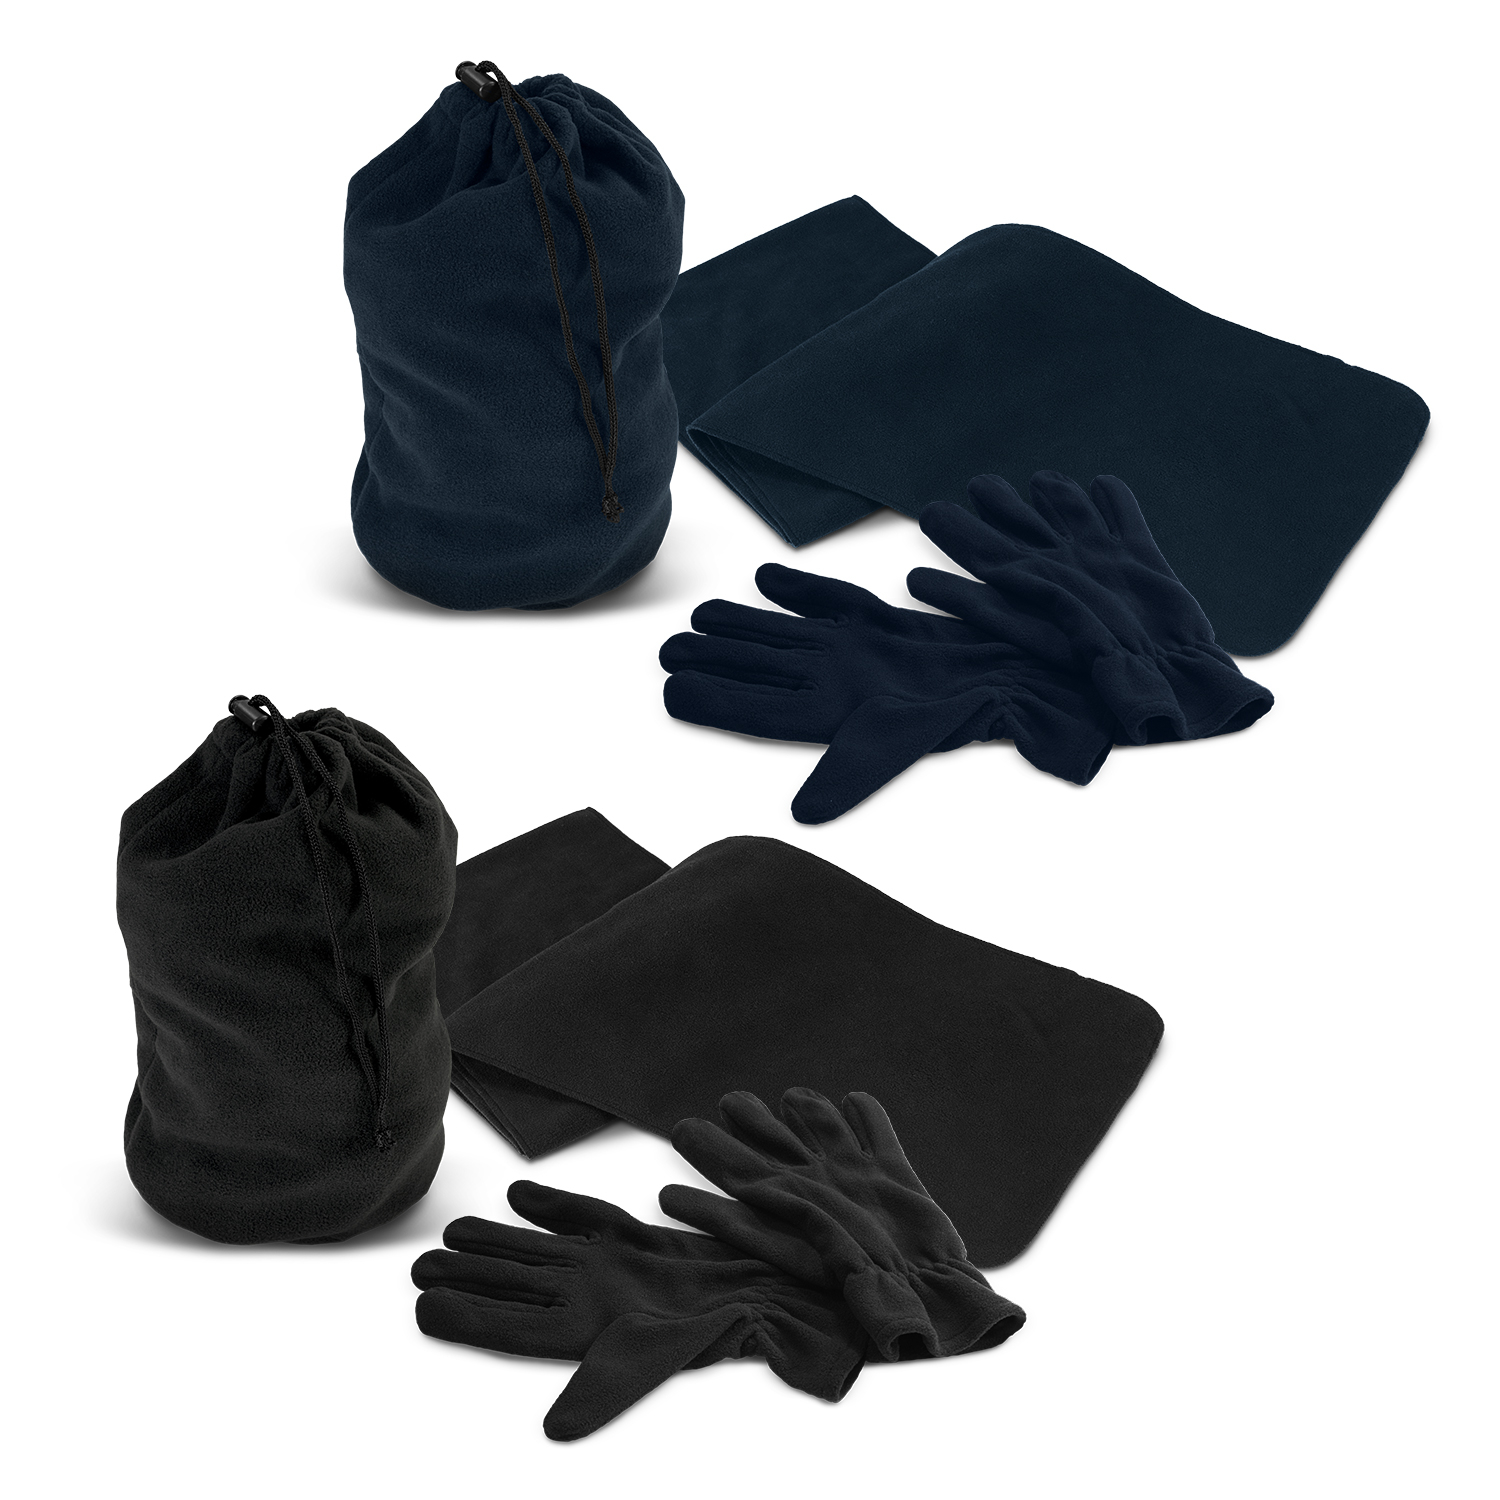 Beanies Seattle Scarf and Gloves Set and